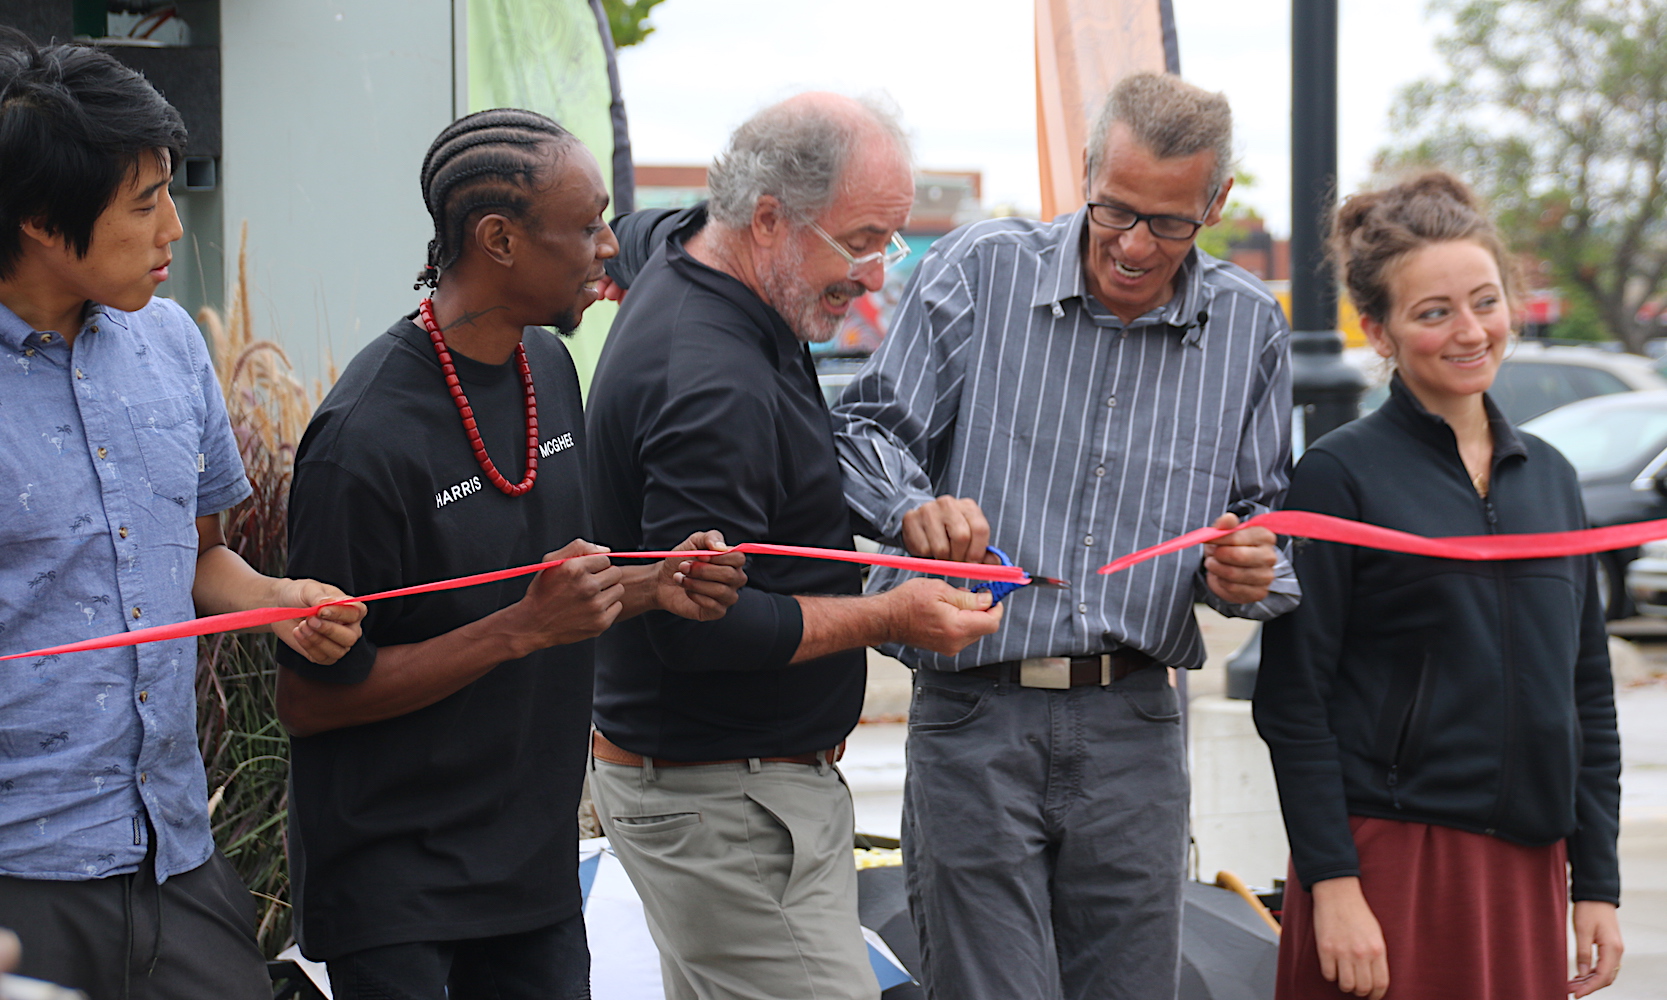 Carlos Nielbock, second from right, cuts the ribbon in front of his wind turbine at Eastern Market's Shed 5.